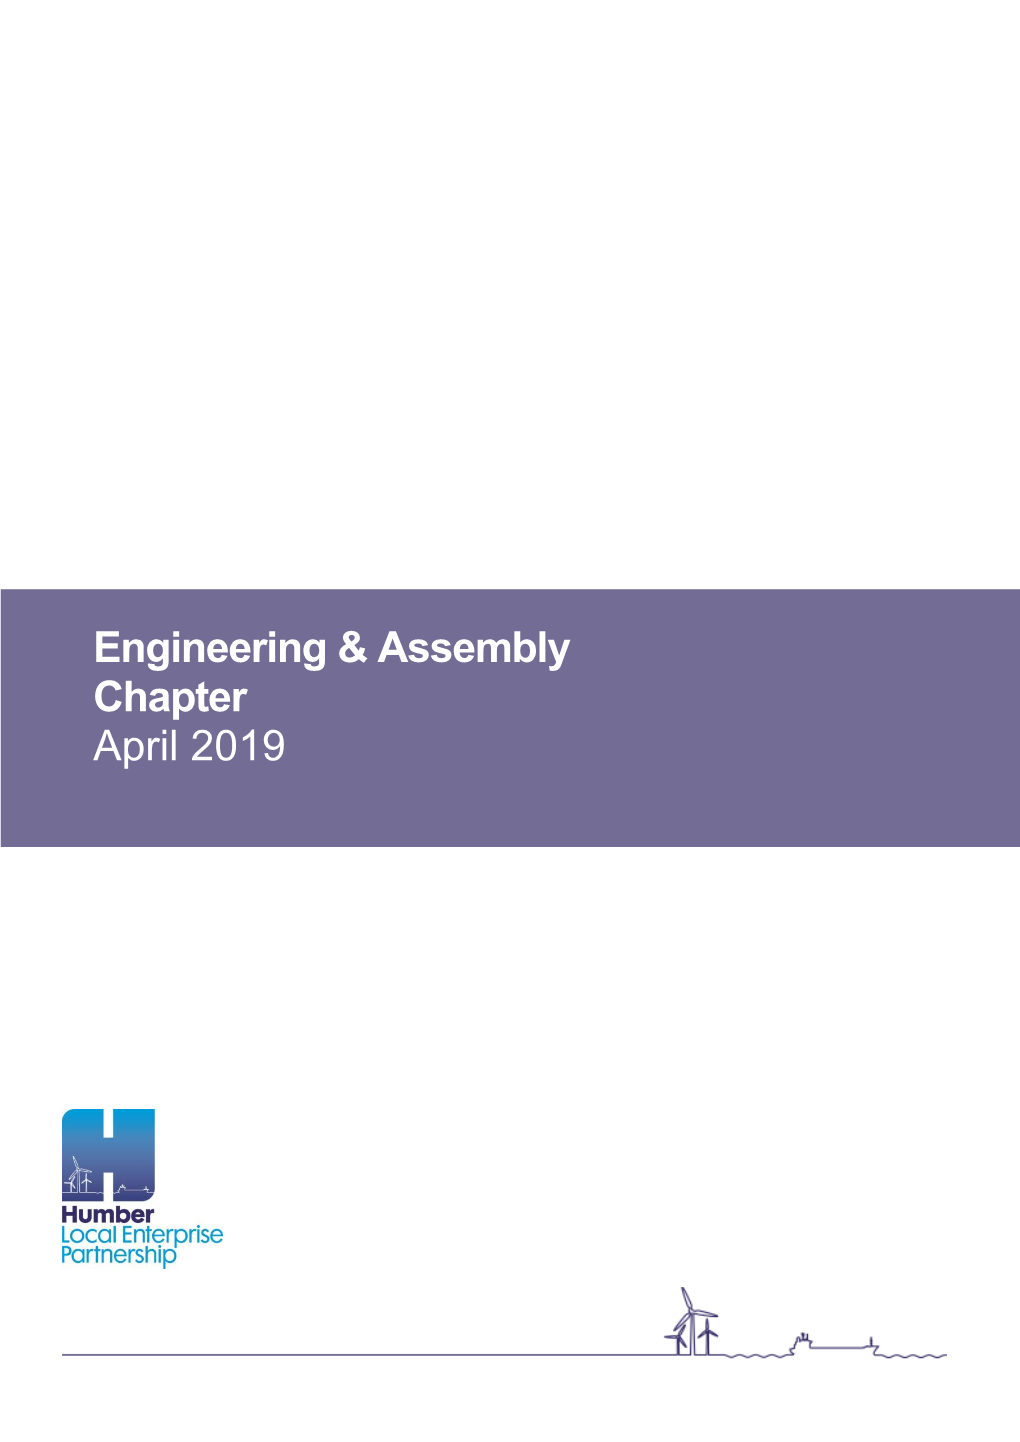 Humber Engineering & Assembly